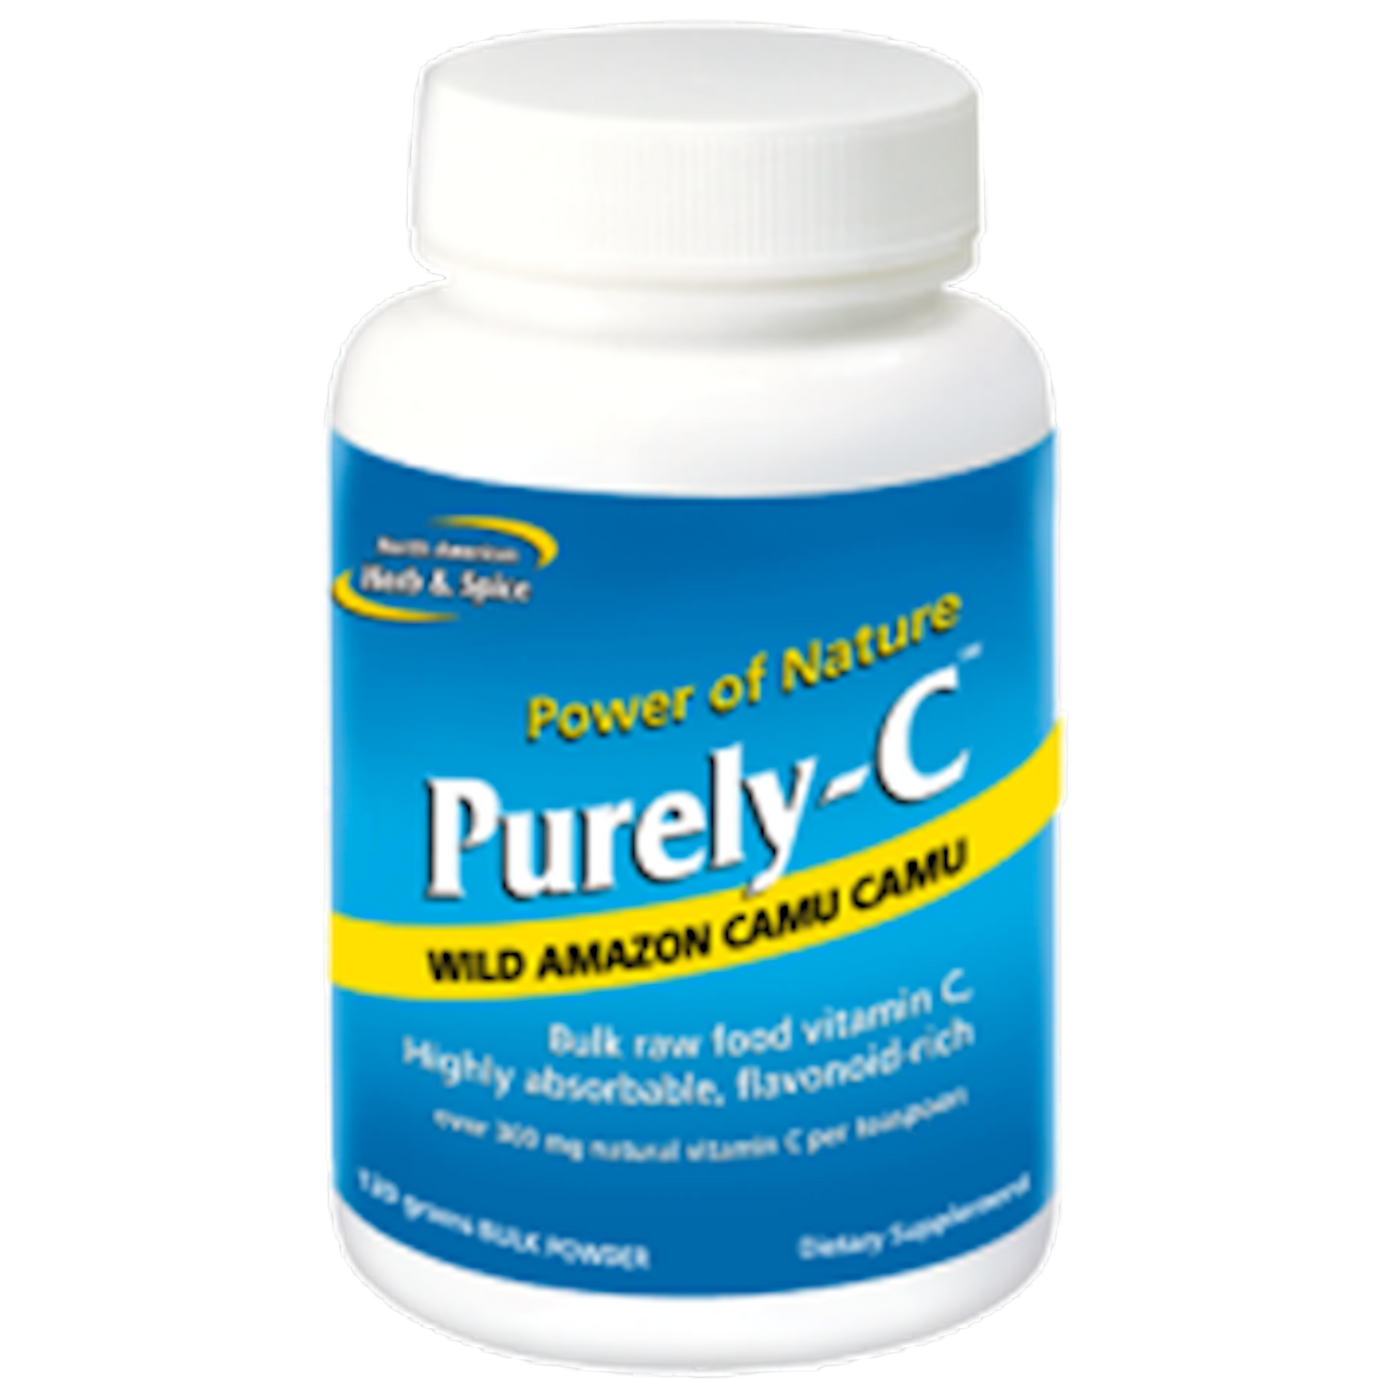 Purely-C (powder) 120 gms Curated Wellness